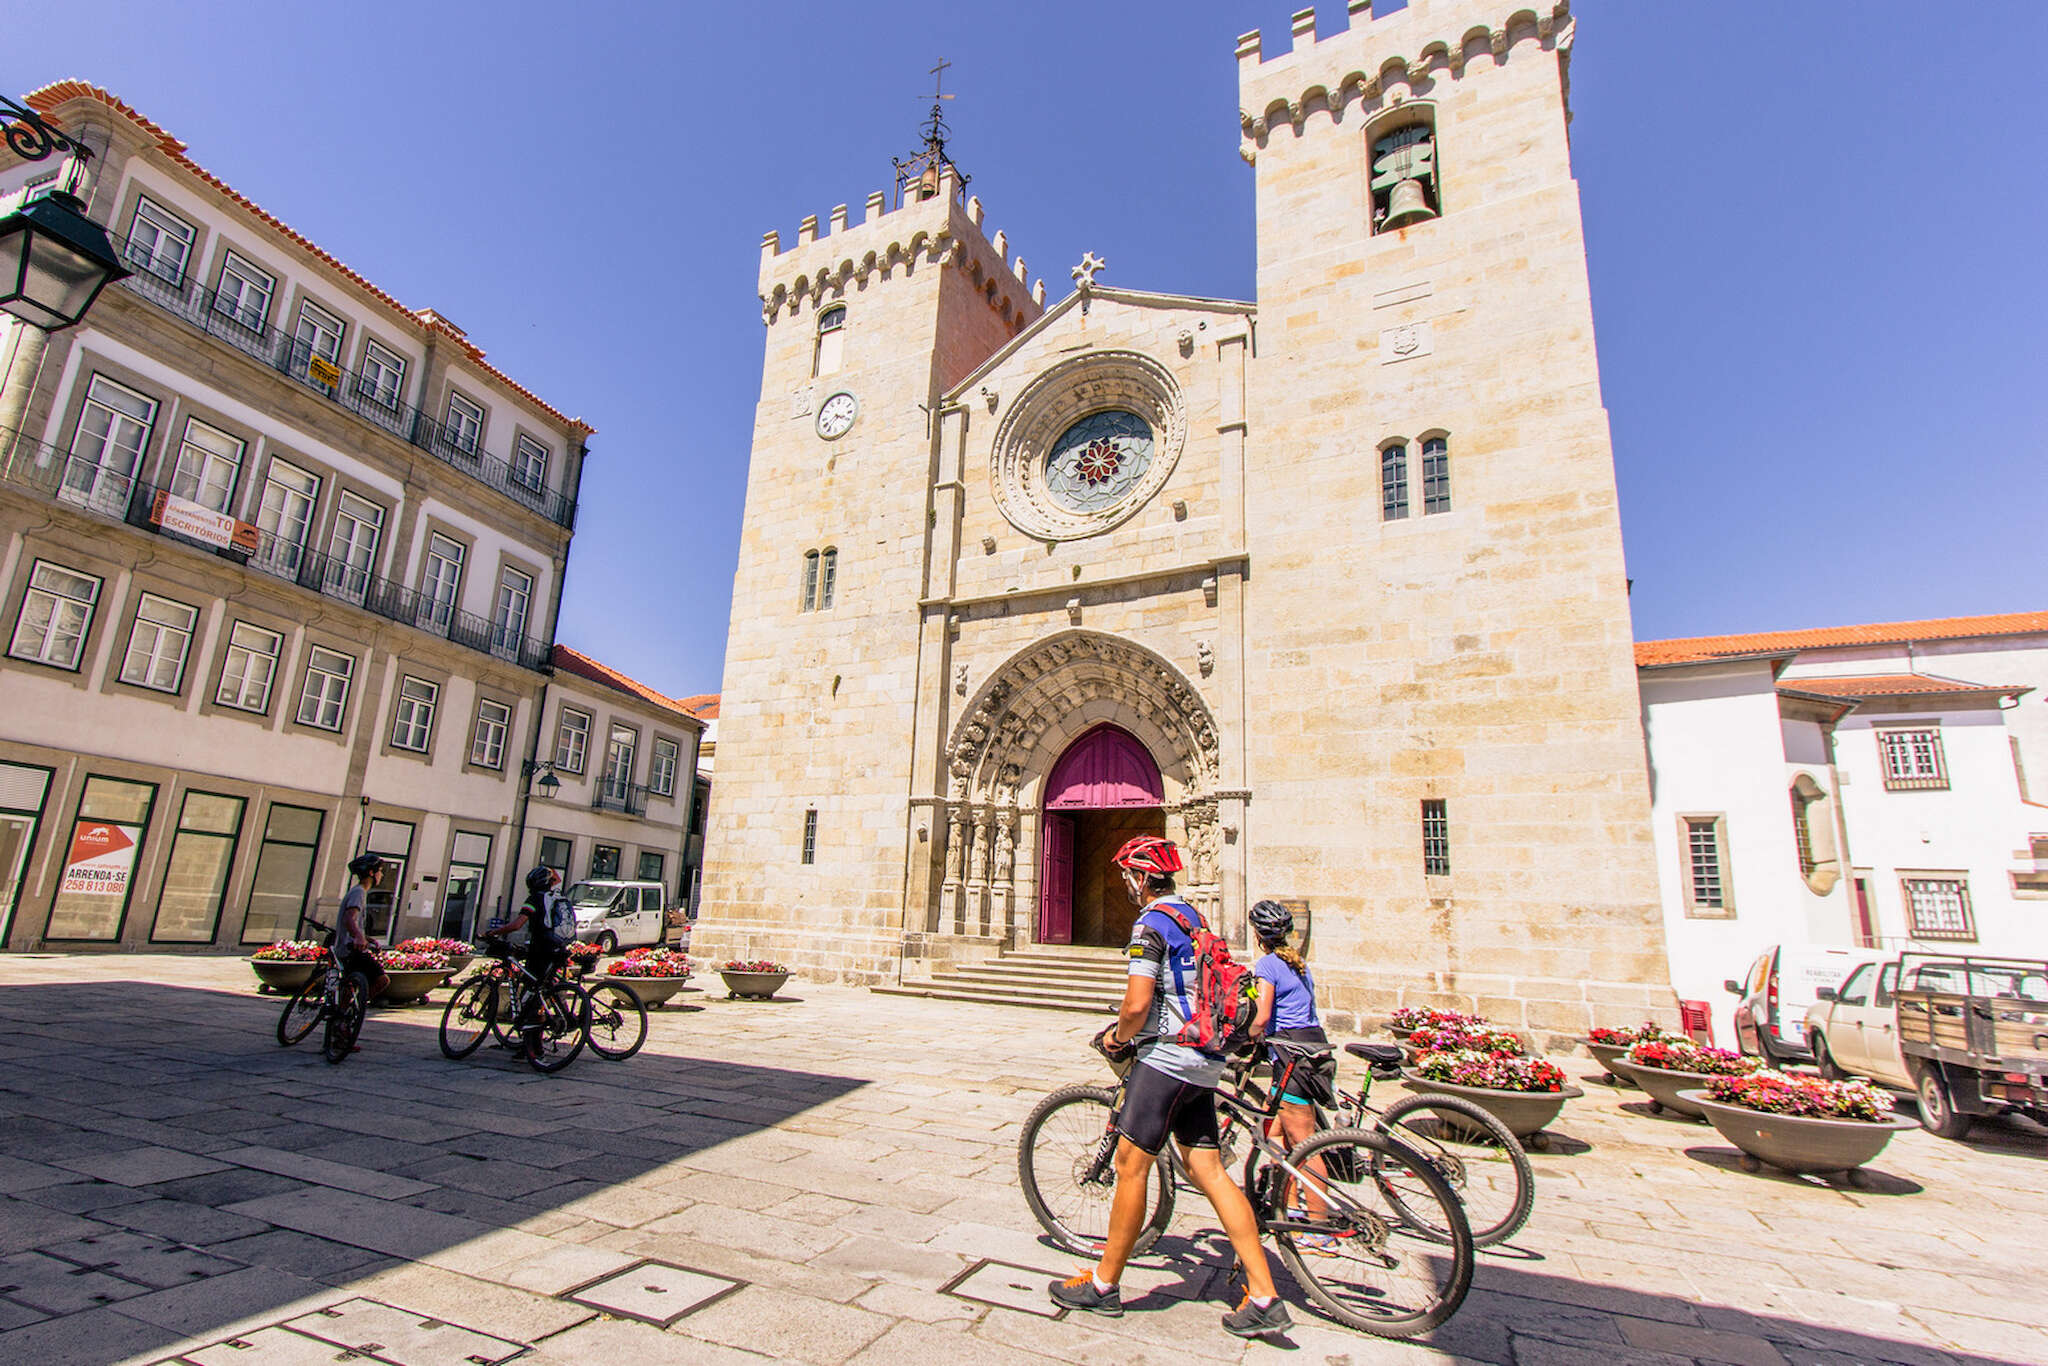 Cyclists admire a church as they push their bikes.